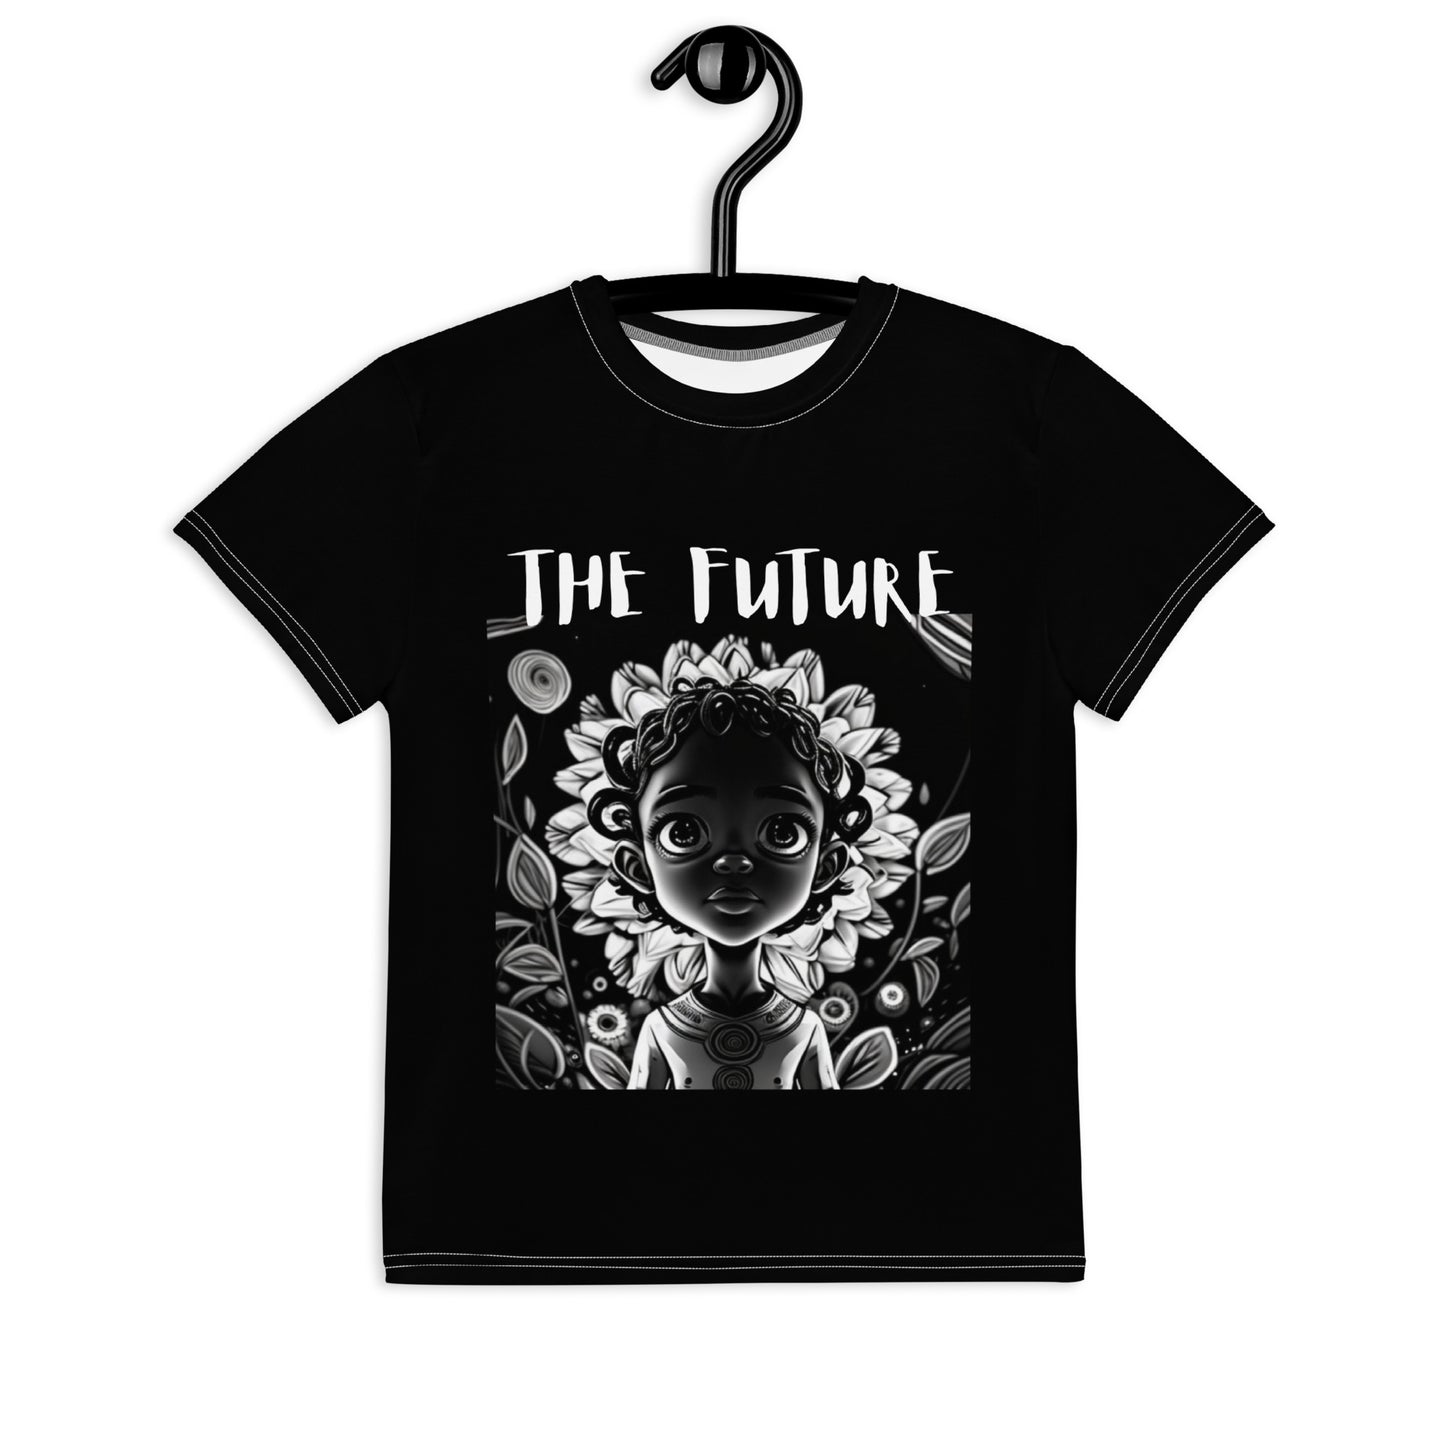 The future Youth crew neck t-shirt